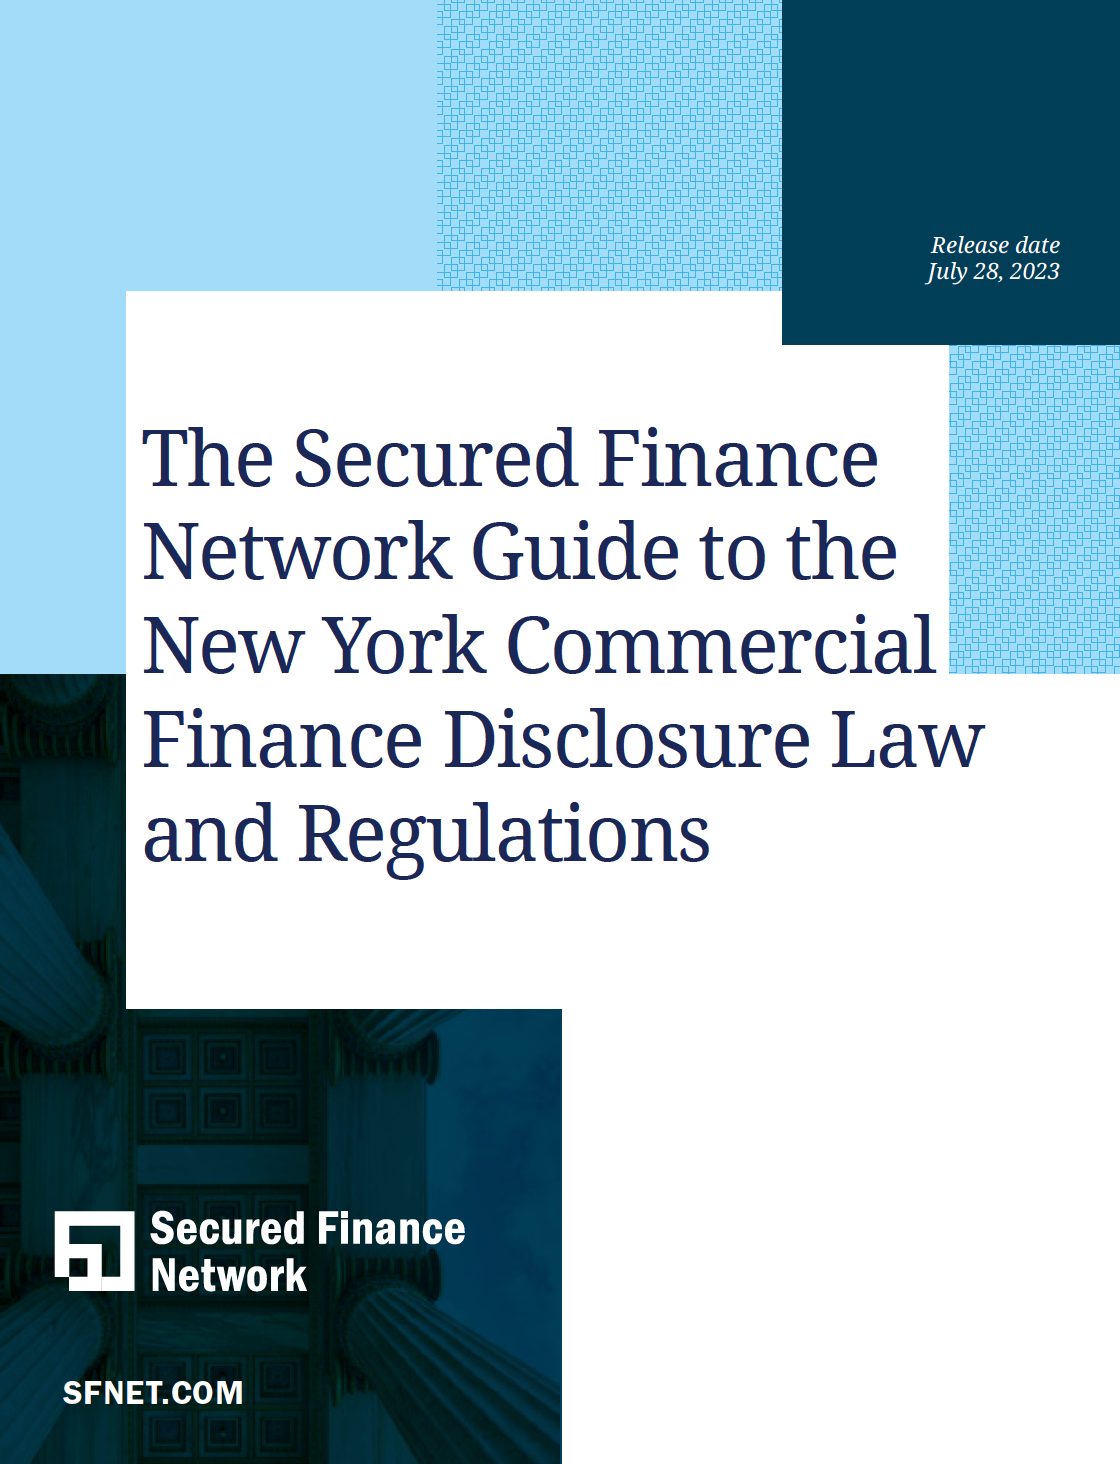 The SFNet Guide to the New York Commercial Finance Disclosure Laws and Regulations